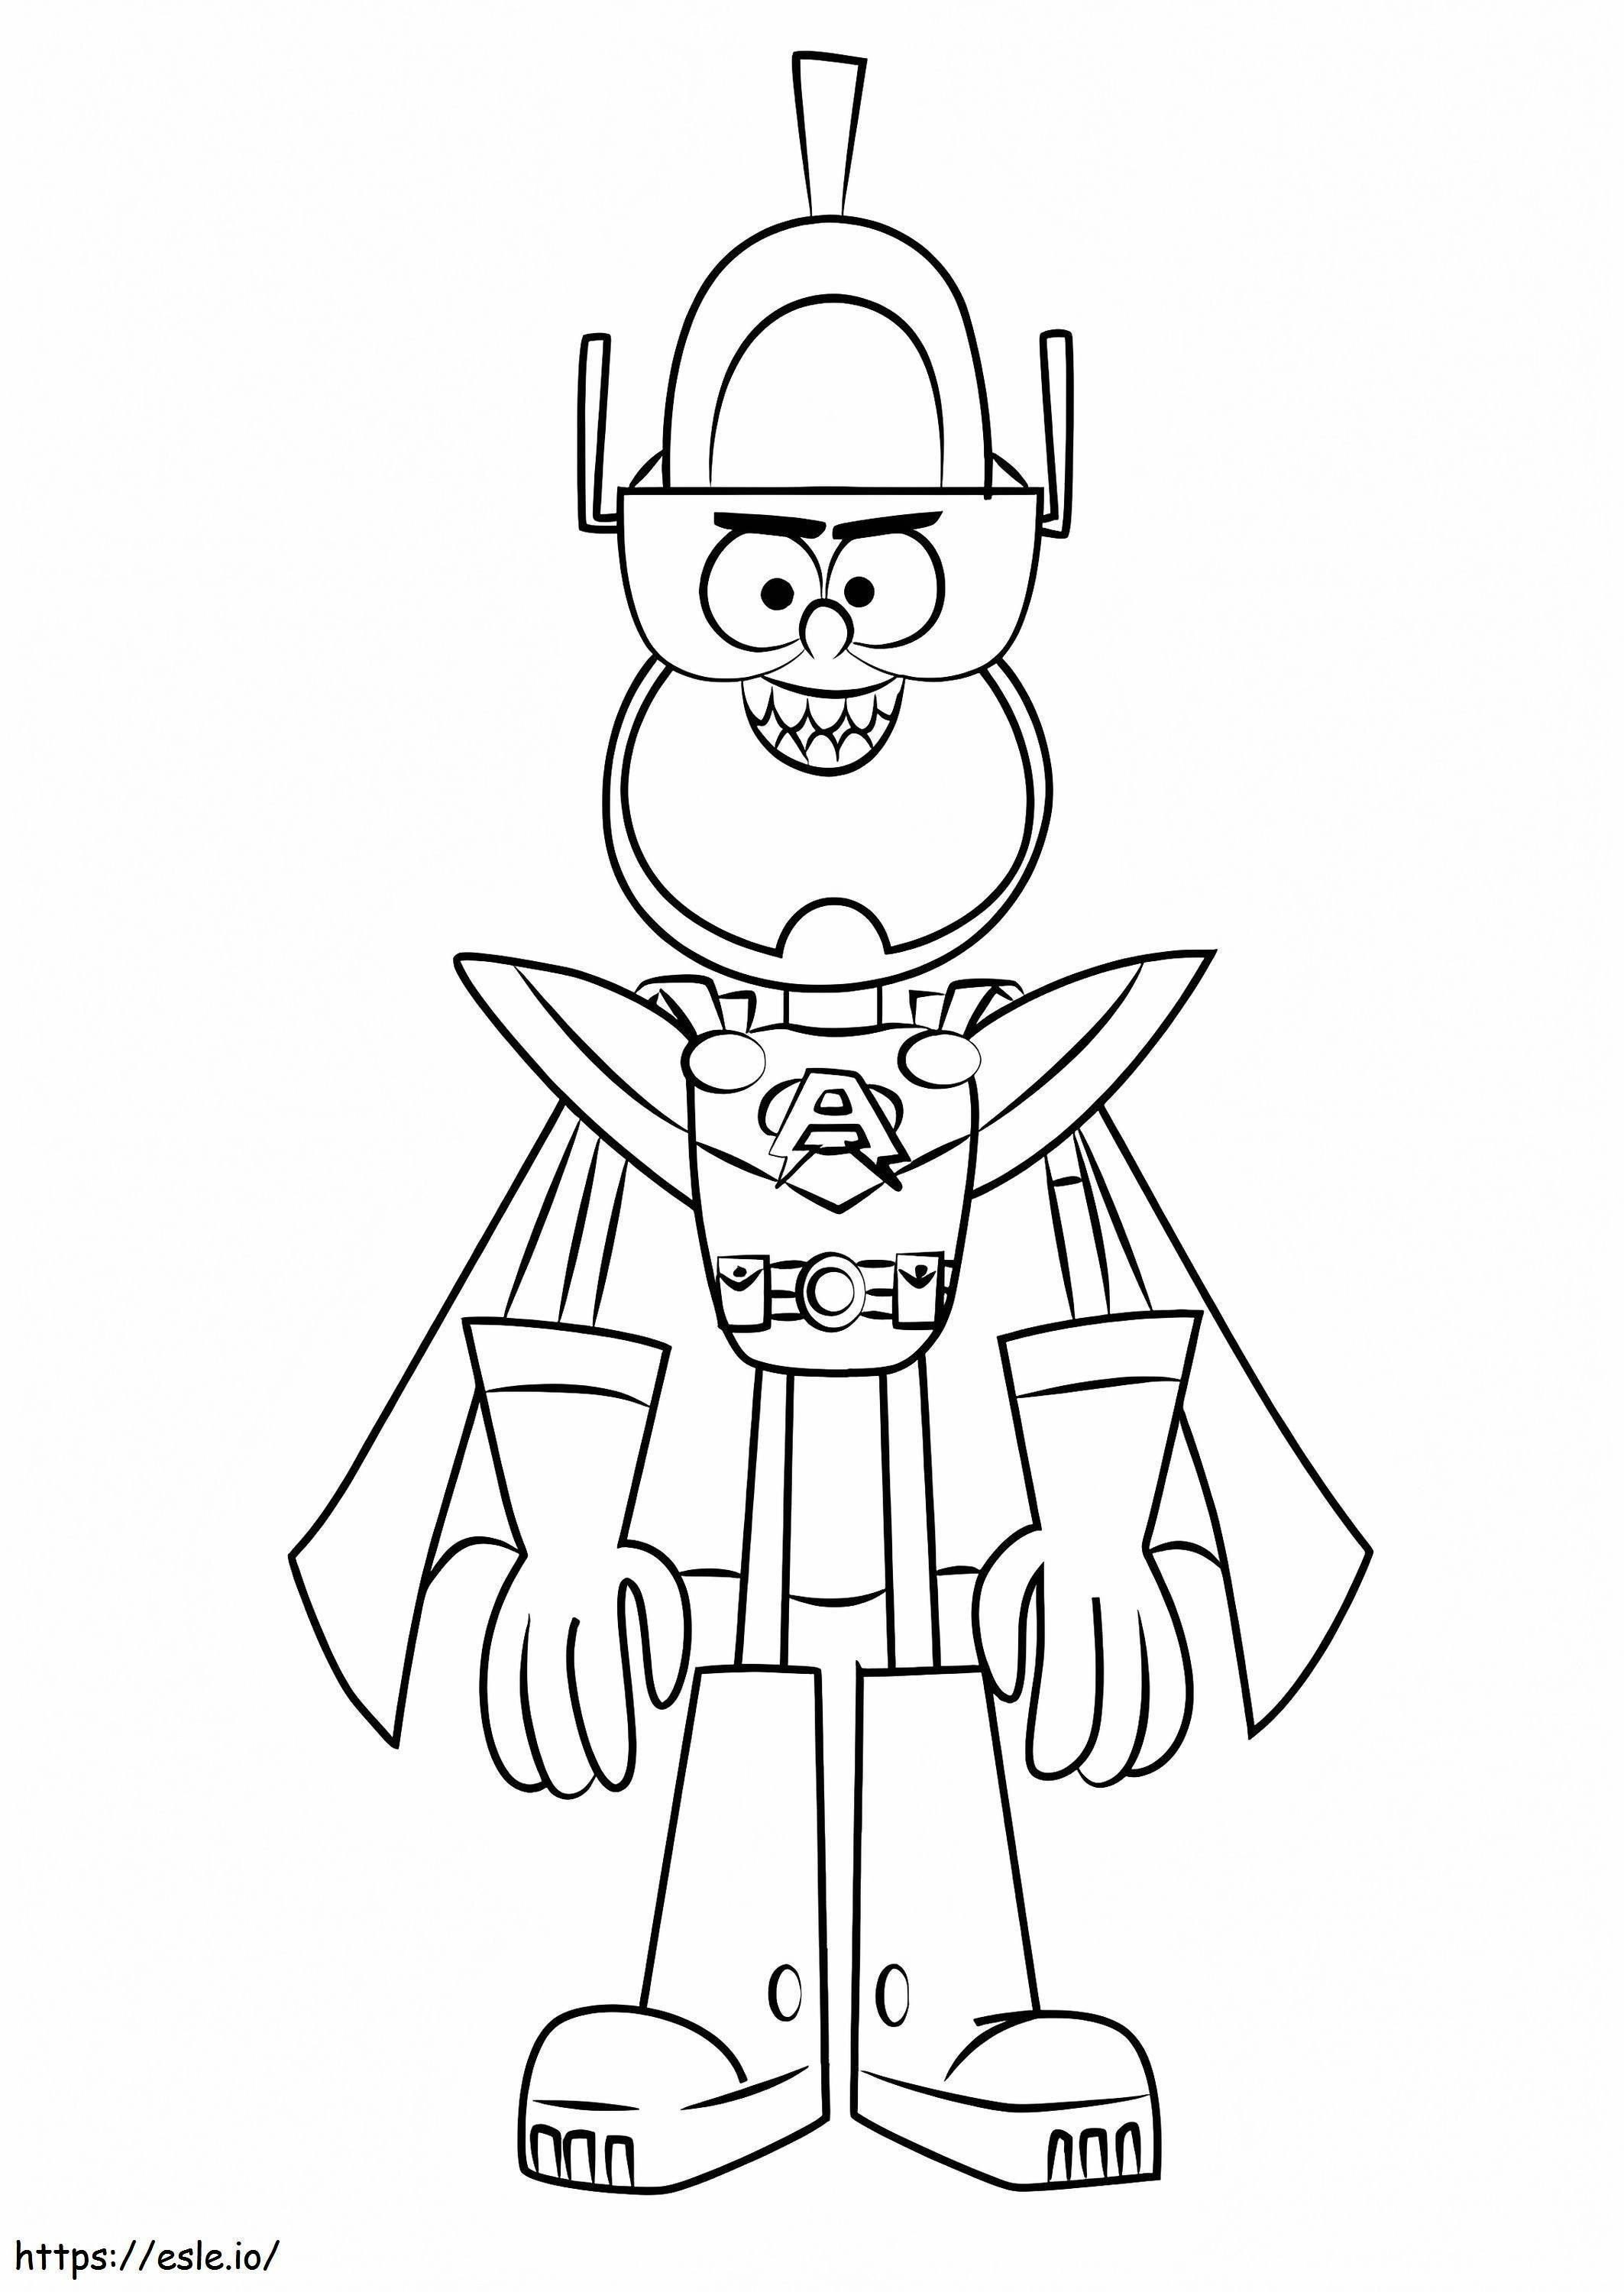 Joey Felt Powered Up coloring page